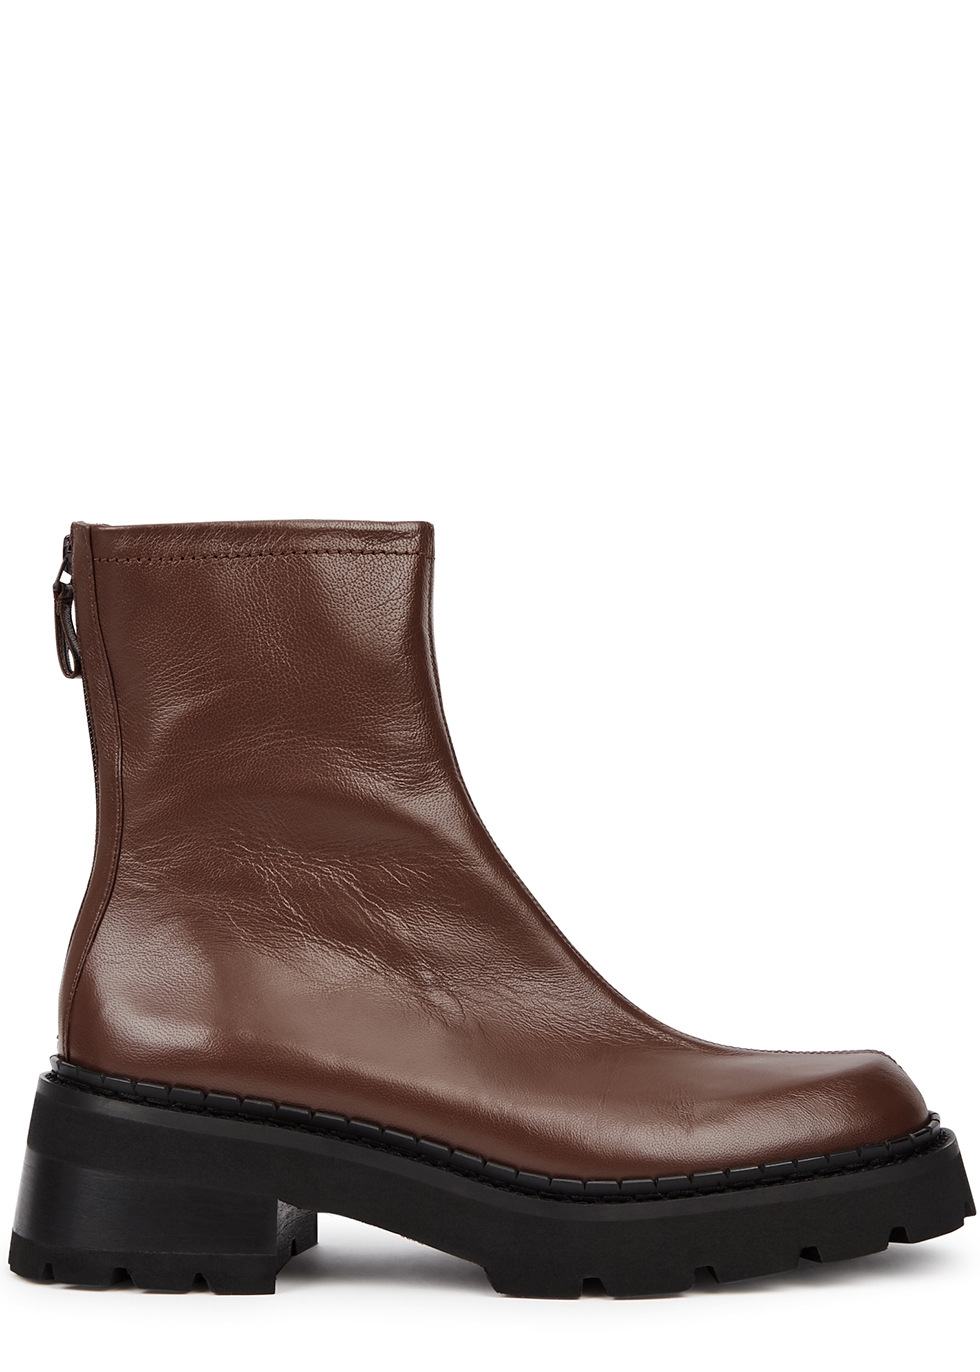 Alistair 50 brown leather ankle boots